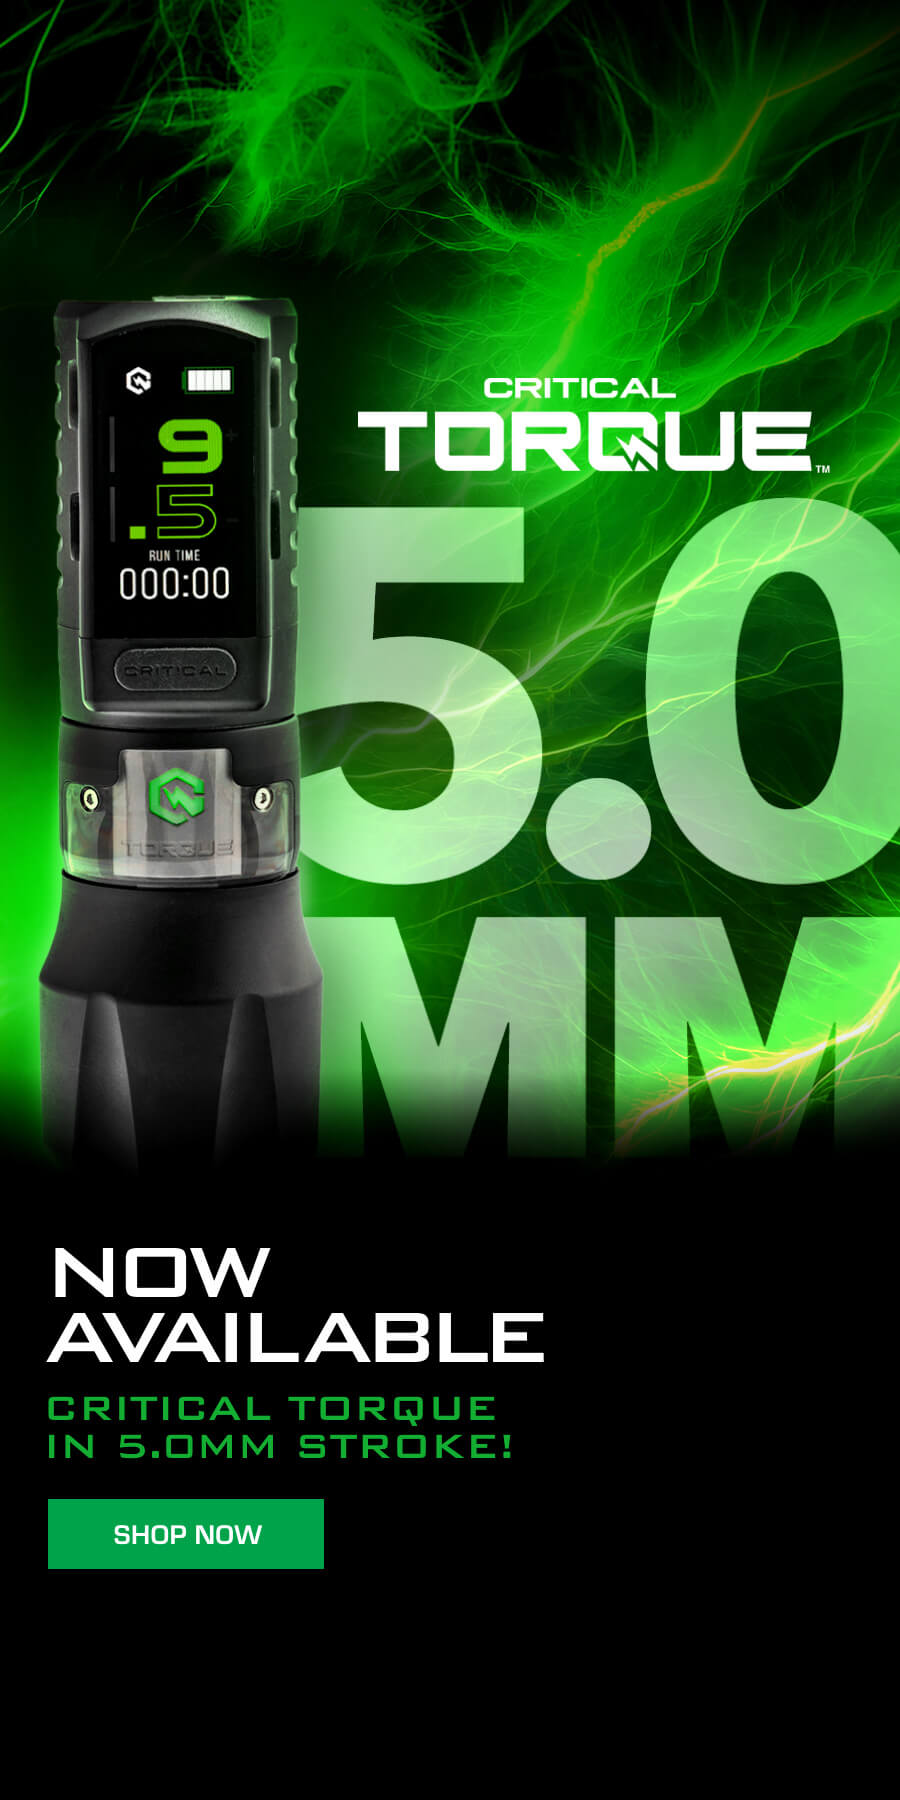 Critical Torque 5.0mm Stroke now available